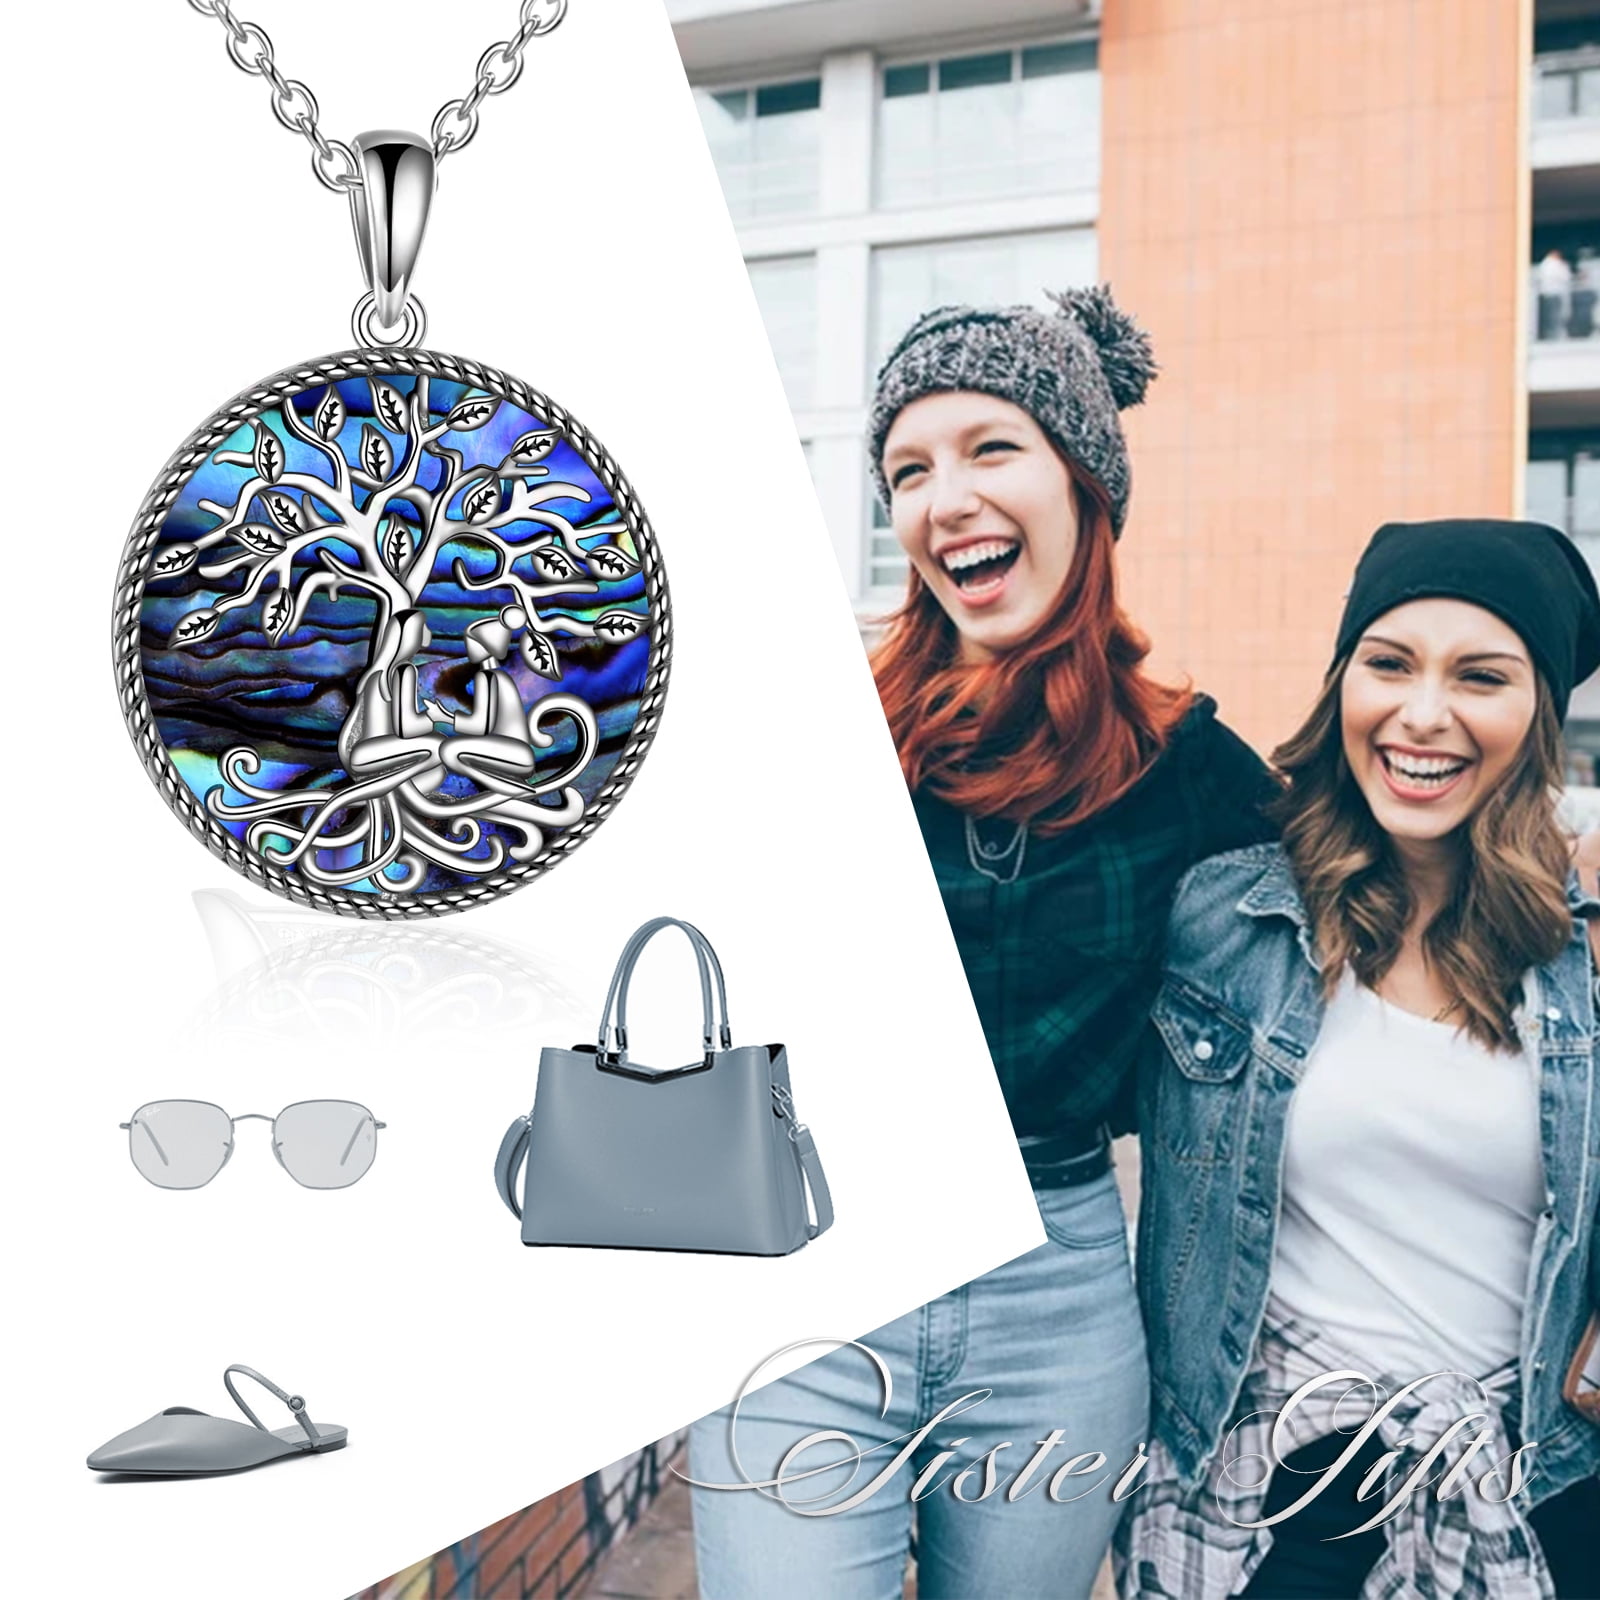 7 style Sister Gifts From Silver Tree of Life Necklace with Circle Crystal  Jewelry for Women Girls - AliExpress